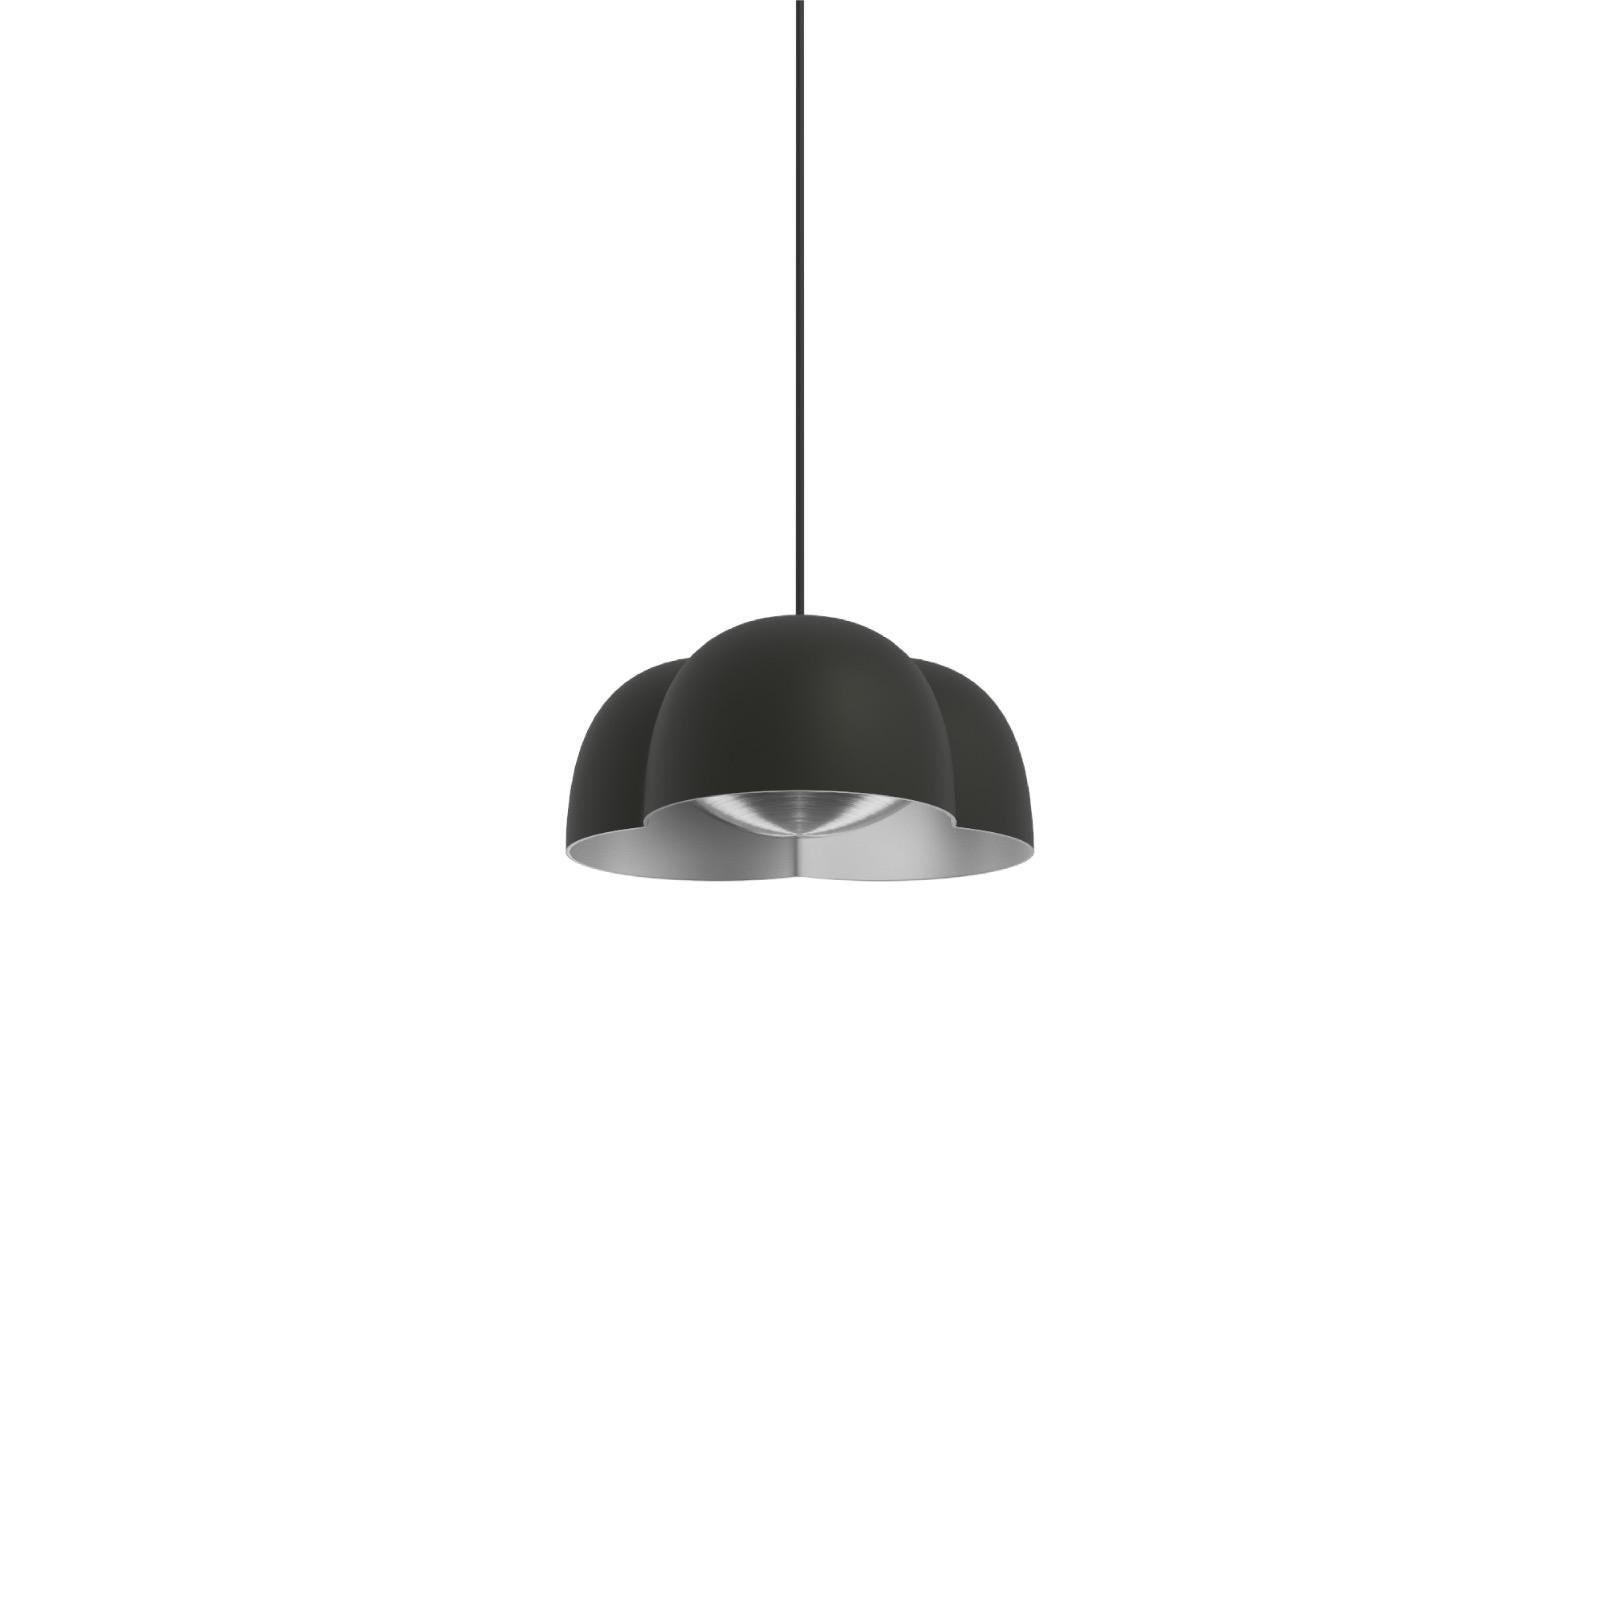 Cotton Pendant lamp by Sebastian Herkner x AGO Lighting
Small - Charcoal

Materials: Aluminum, Stainless 
Light Source: Integrated LED (SMD), DC
Watt. 4W
Color temp. 2700 / 3000K
Cable Length: 3m 

Available colors:
Charcoal, chocolate,